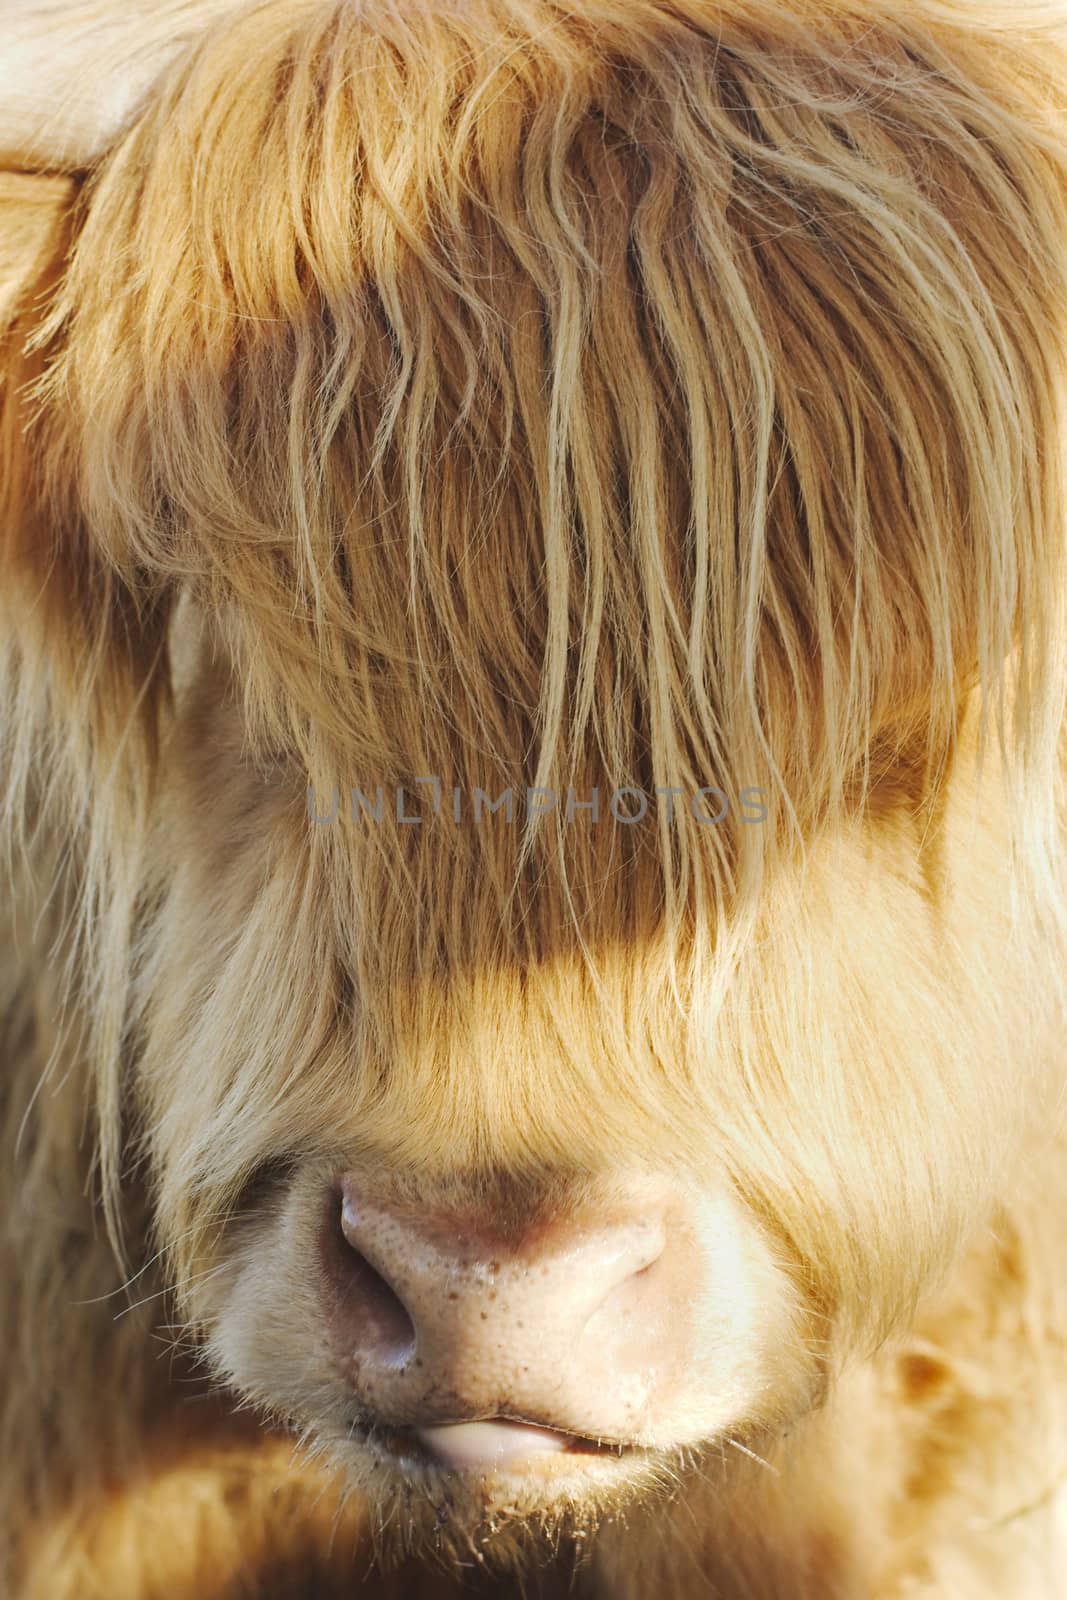 Highland cow by t3mujin